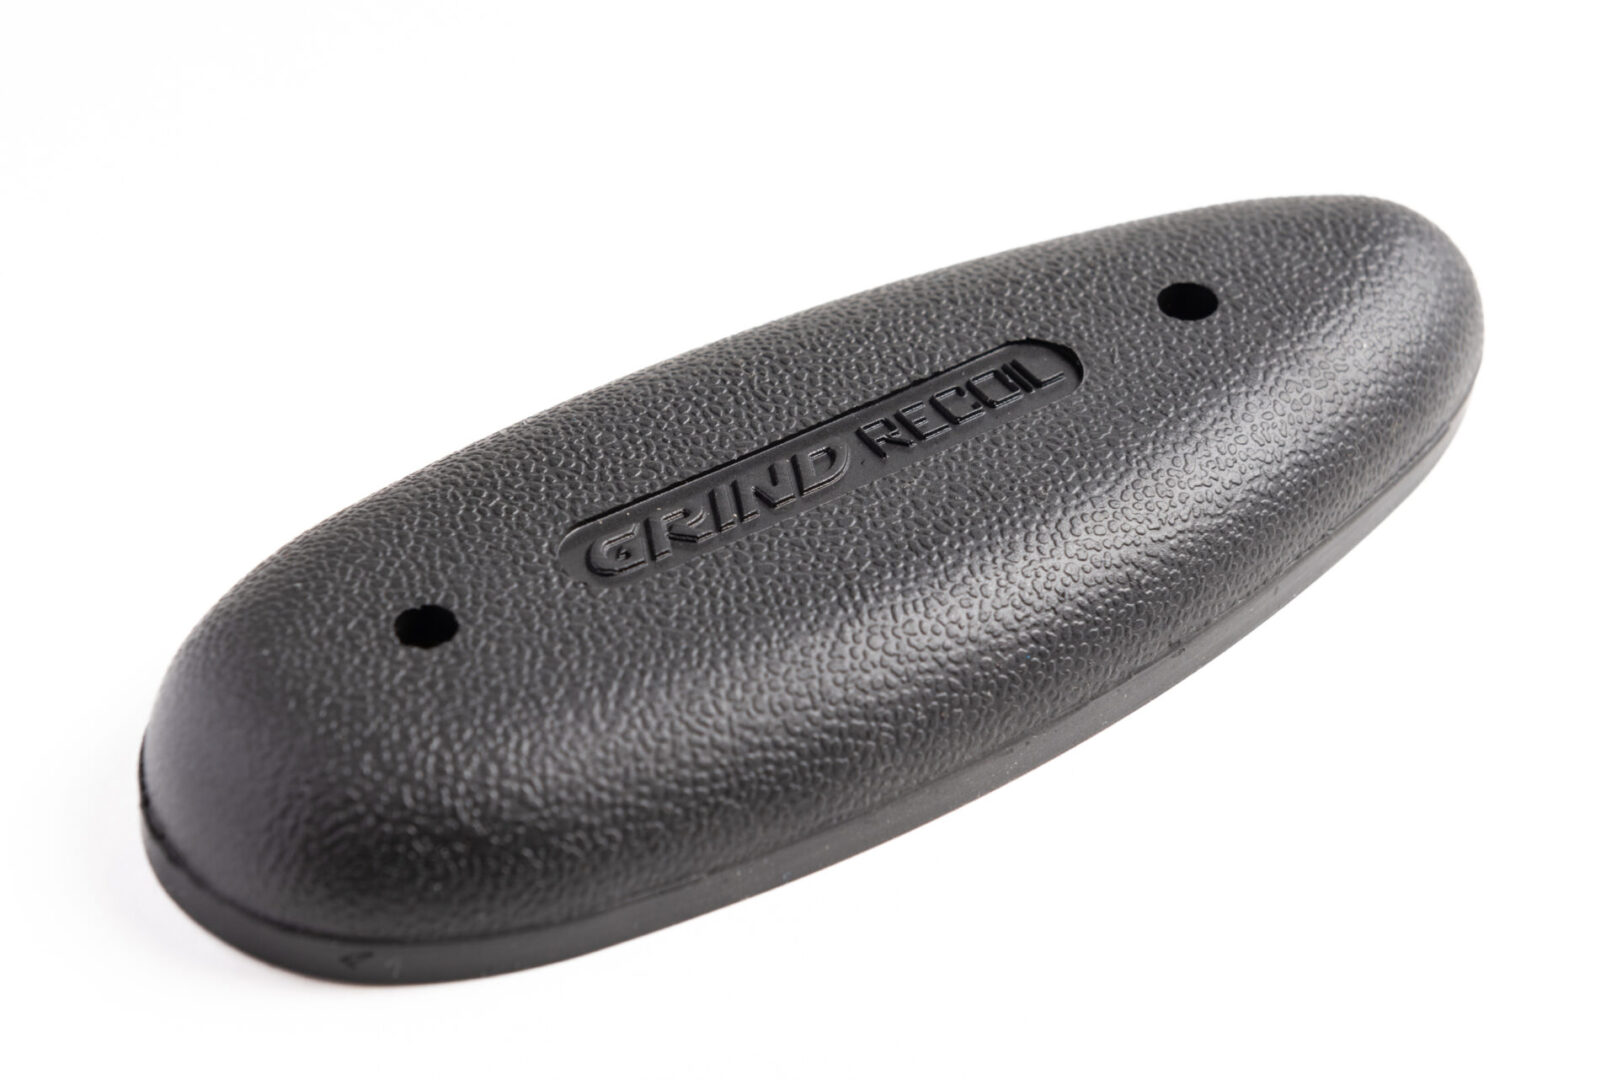 A black plastic object with the grinduro logo on it.